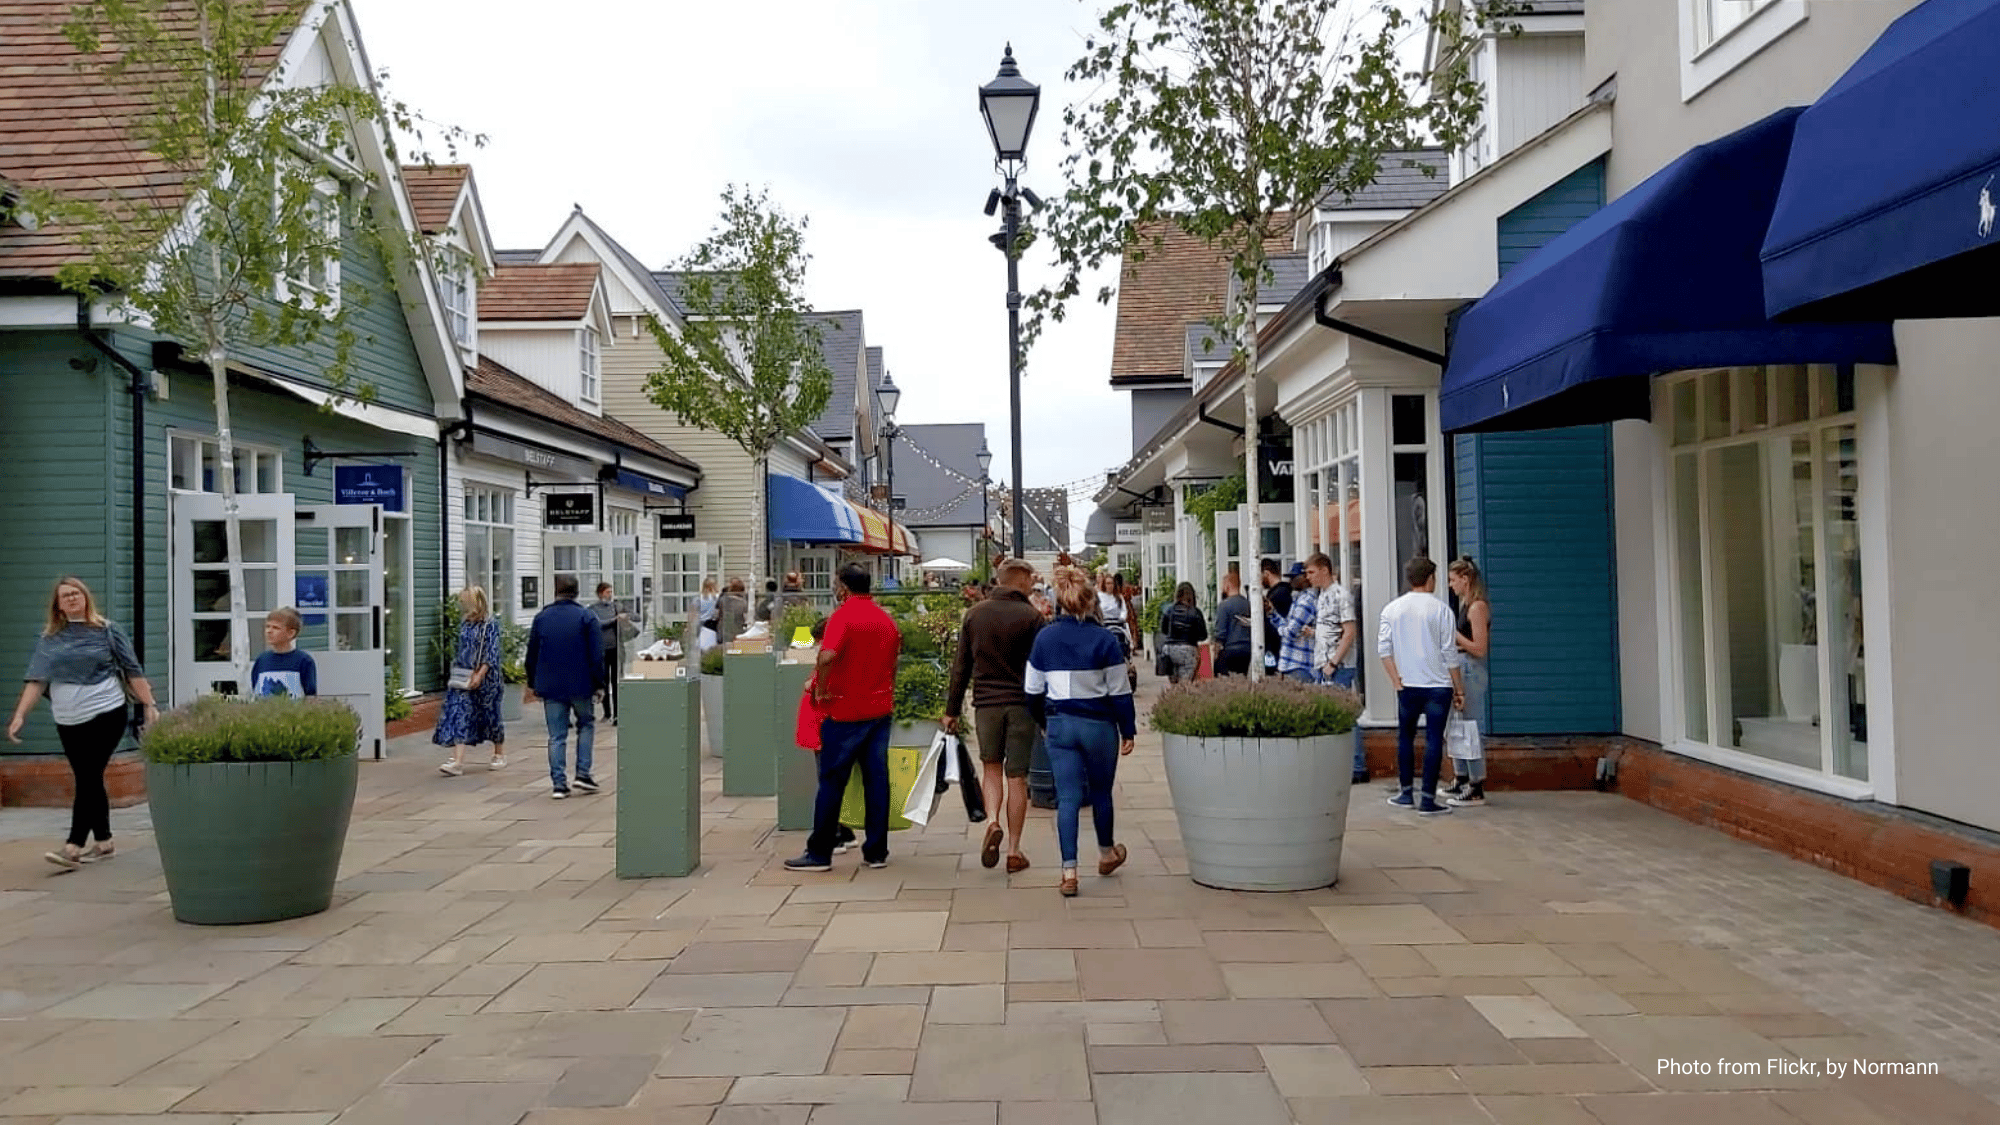 Bustling main street of local shopping village in Bicester